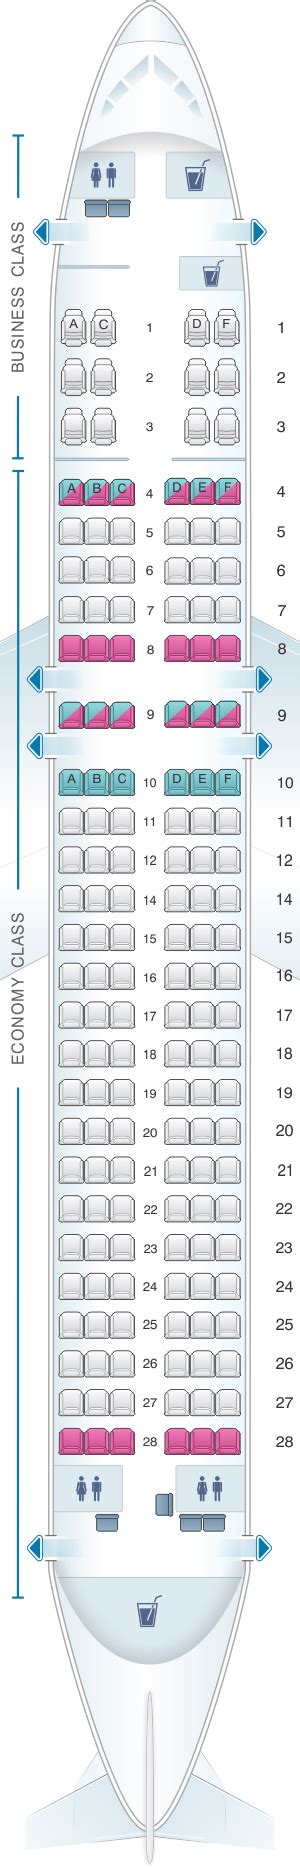 Philippine Airlines A Seating Chart Elcho Table